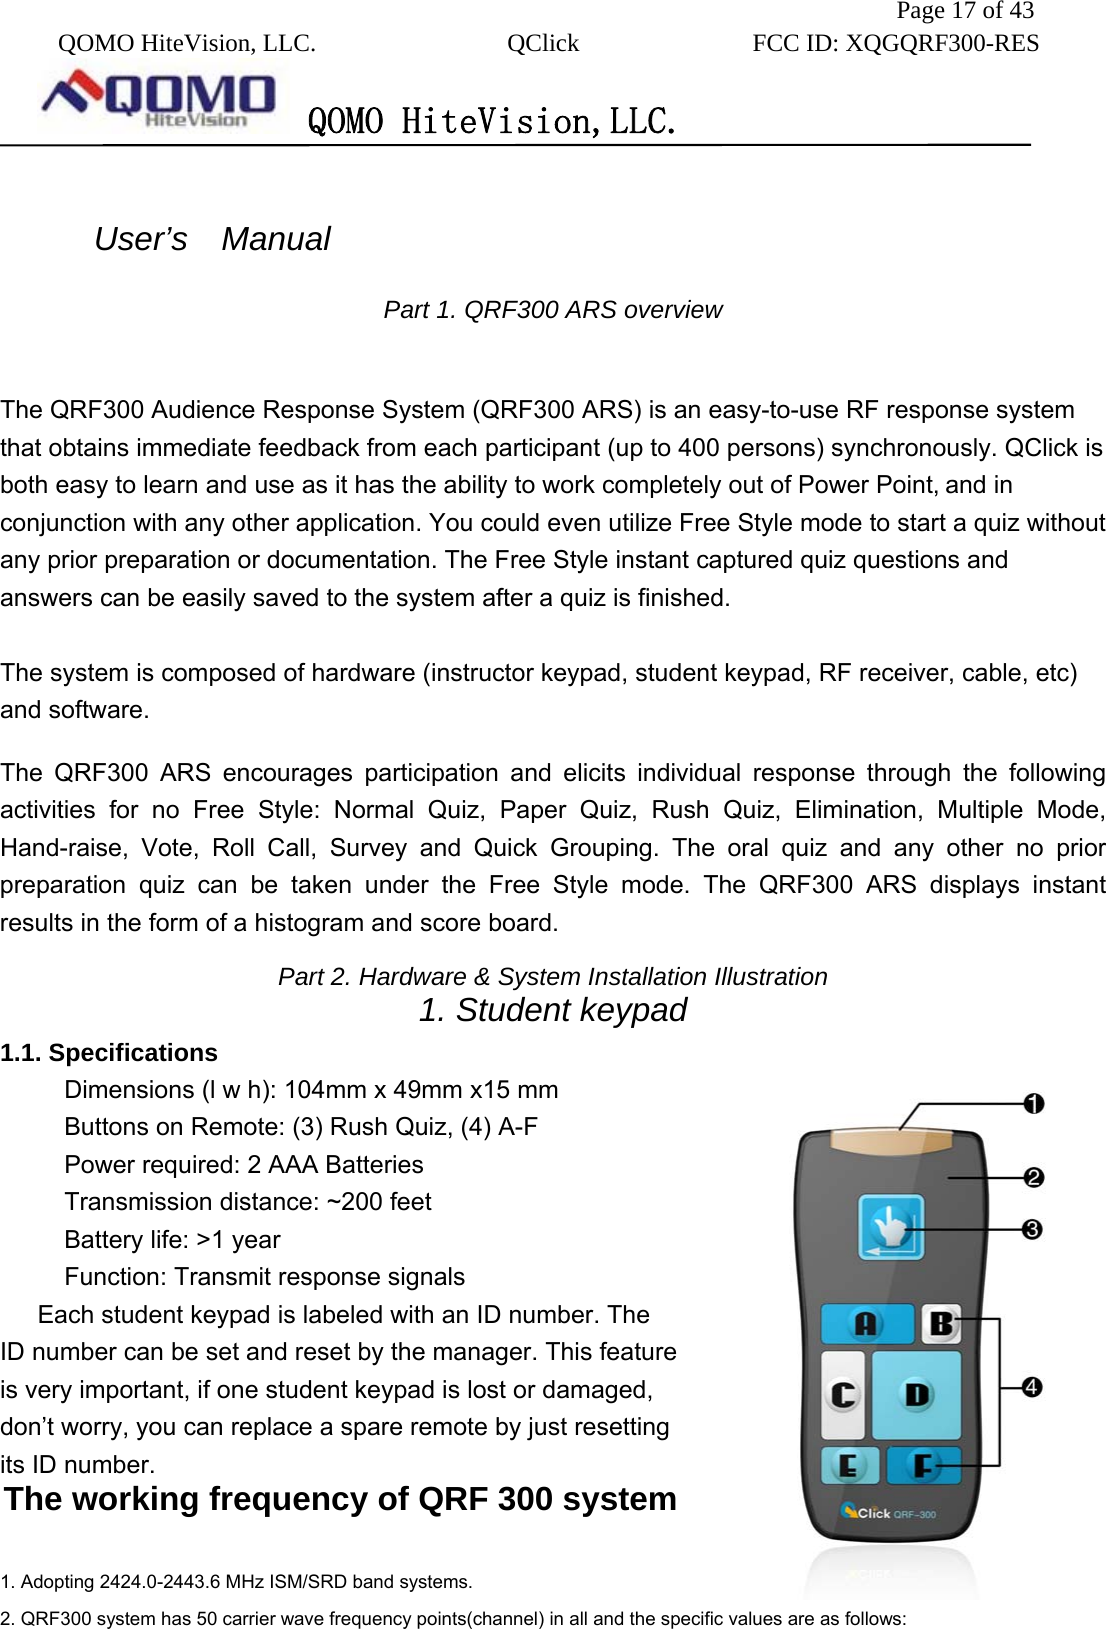               Page 17 of 43  QOMO HiteVision, LLC.  QClick        FCC ID: XQGQRF300-RES      QOMO HiteVision,LLC.    User’s  Manual  Part 1. QRF300 ARS overview  The QRF300 Audience Response System (QRF300 ARS) is an easy-to-use RF response system that obtains immediate feedback from each participant (up to 400 persons) synchronously. QClick is both easy to learn and use as it has the ability to work completely out of Power Point, and in conjunction with any other application. You could even utilize Free Style mode to start a quiz without any prior preparation or documentation. The Free Style instant captured quiz questions and answers can be easily saved to the system after a quiz is finished.   The system is composed of hardware (instructor keypad, student keypad, RF receiver, cable, etc) and software. The QRF300 ARS encourages participation and elicits individual response through the following activities for no Free Style: Normal Quiz, Paper Quiz, Rush Quiz, Elimination, Multiple Mode, Hand-raise, Vote, Roll Call, Survey and Quick Grouping. The oral quiz and any other no prior preparation quiz can be taken under the Free Style mode. The QRF300 ARS displays instant results in the form of a histogram and score board.   Part 2. Hardware &amp; System Installation Illustration 1. Student keypad   1.1. Specifications Dimensions (l w h): 104mm x 49mm x15 mm Buttons on Remote: (3) Rush Quiz, (4) A-F Power required: 2 AAA Batteries Transmission distance: ~200 feet Battery life: &gt;1 year Function: Transmit response signals Each student keypad is labeled with an ID number. The ID number can be set and reset by the manager. This feature is very important, if one student keypad is lost or damaged, don’t worry, you can replace a spare remote by just resetting its ID number.   The working frequency of QRF 300 system  1. Adopting 2424.0-2443.6 MHz ISM/SRD band systems.   2. QRF300 system has 50 carrier wave frequency points(channel) in all and the specific values are as follows: 